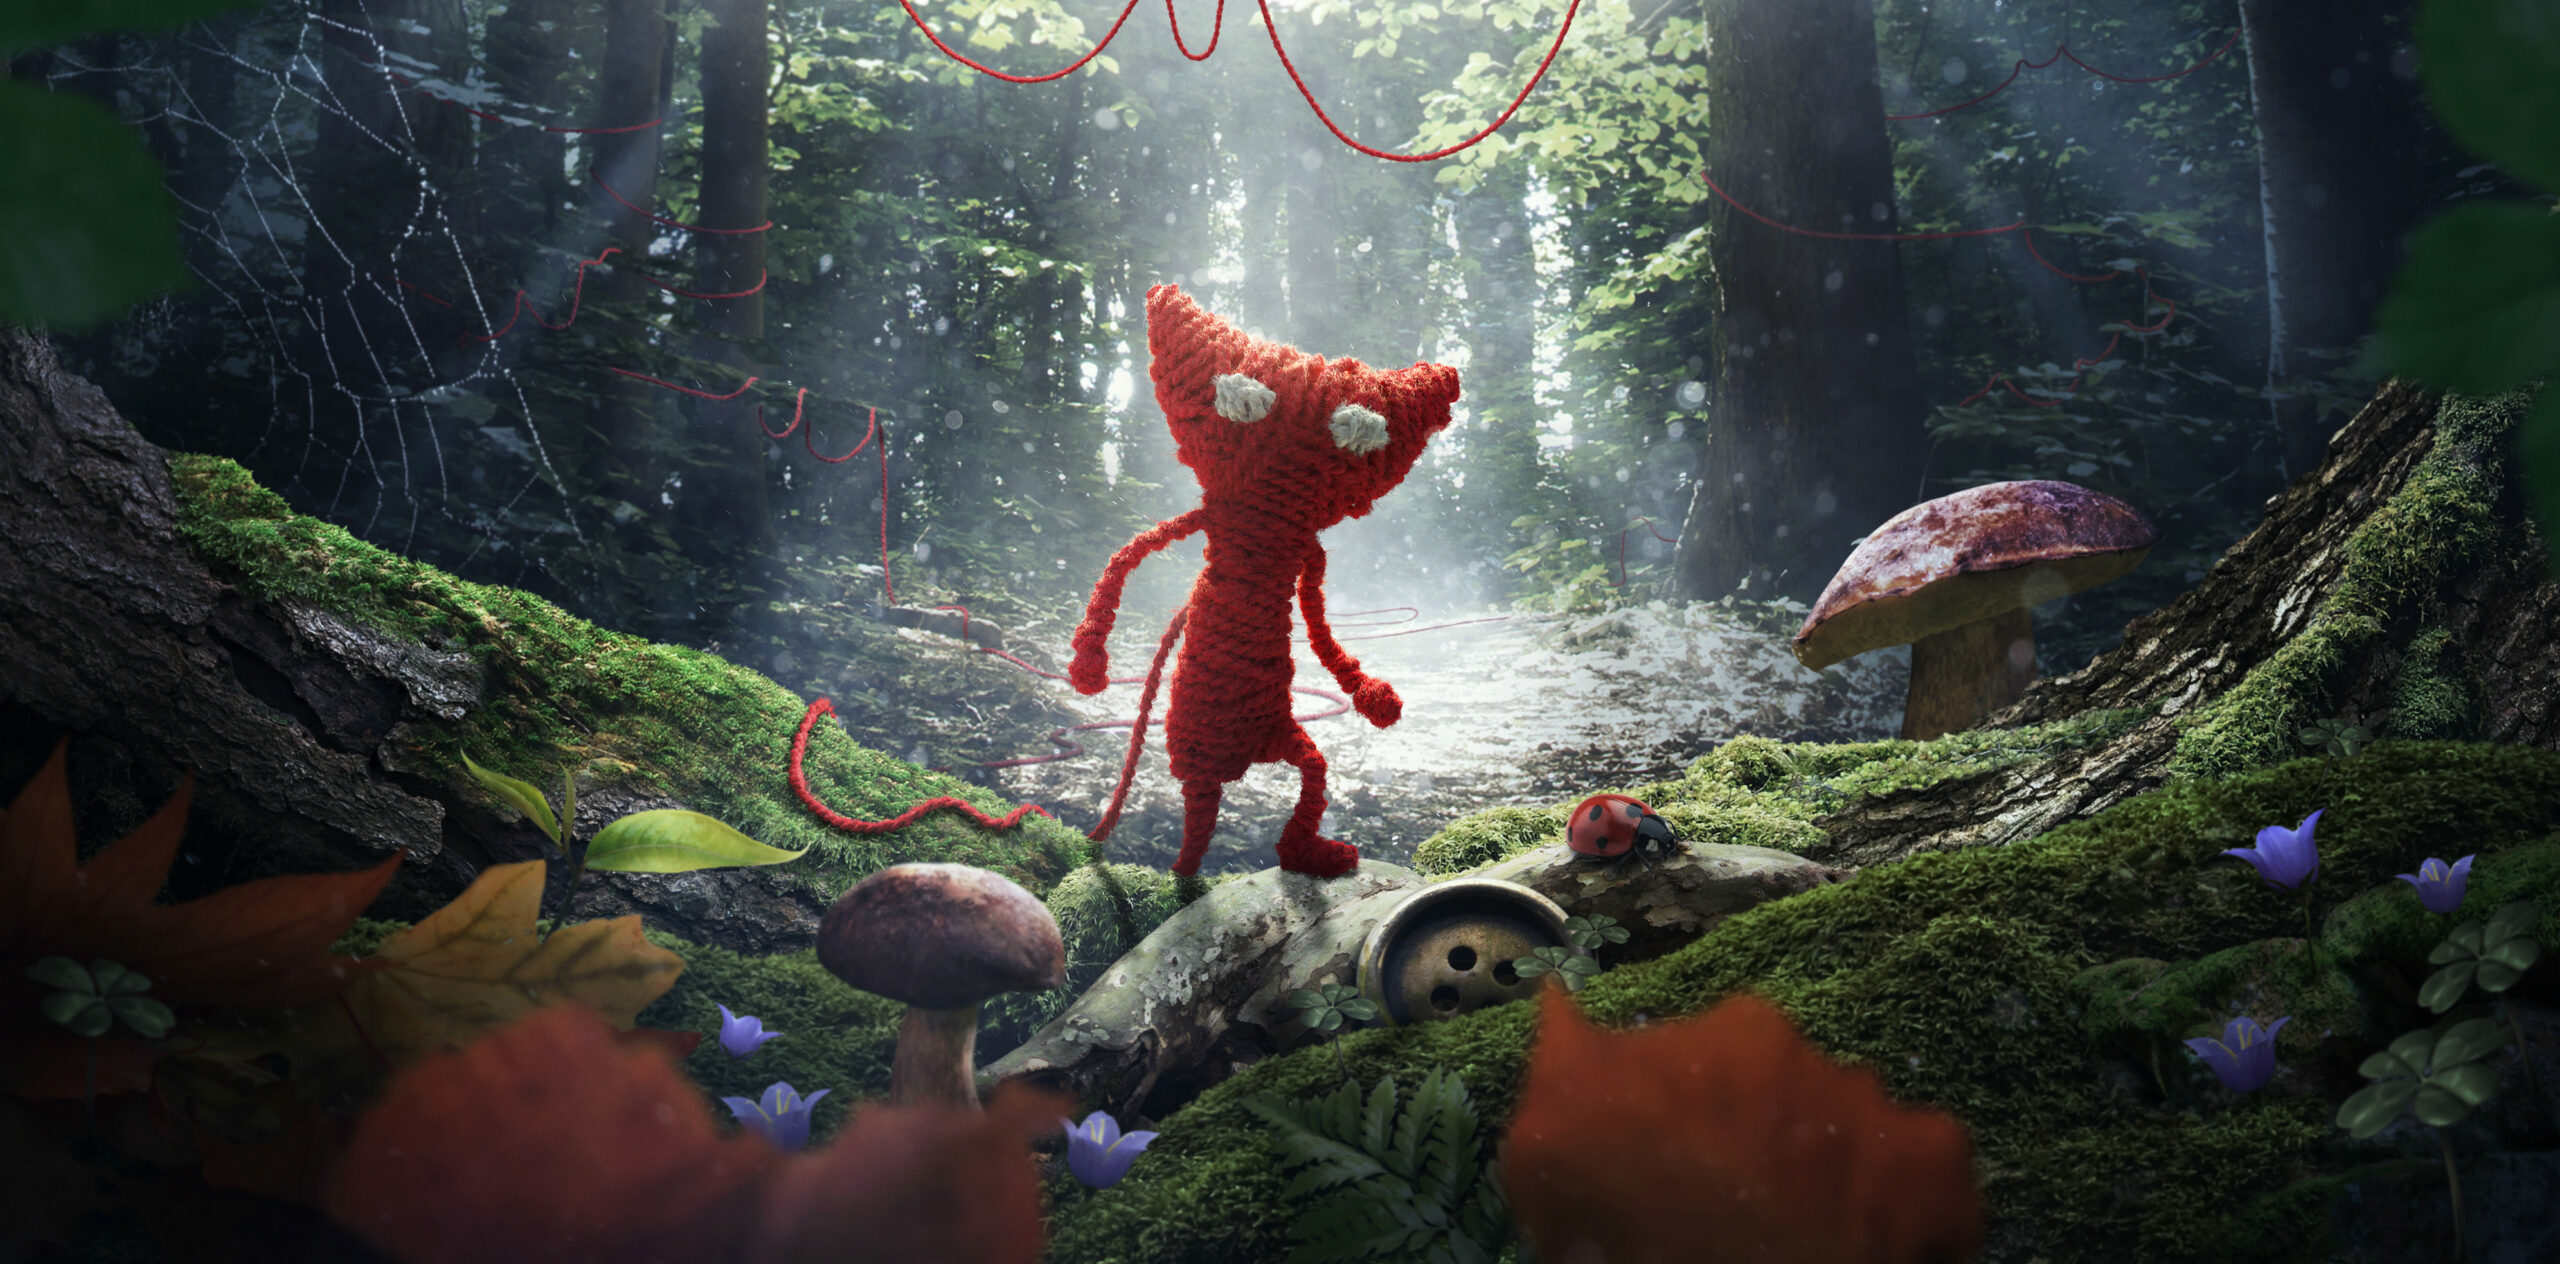 10 Unravel/Unravel 2 ideas  indie games, fan art, playstation games